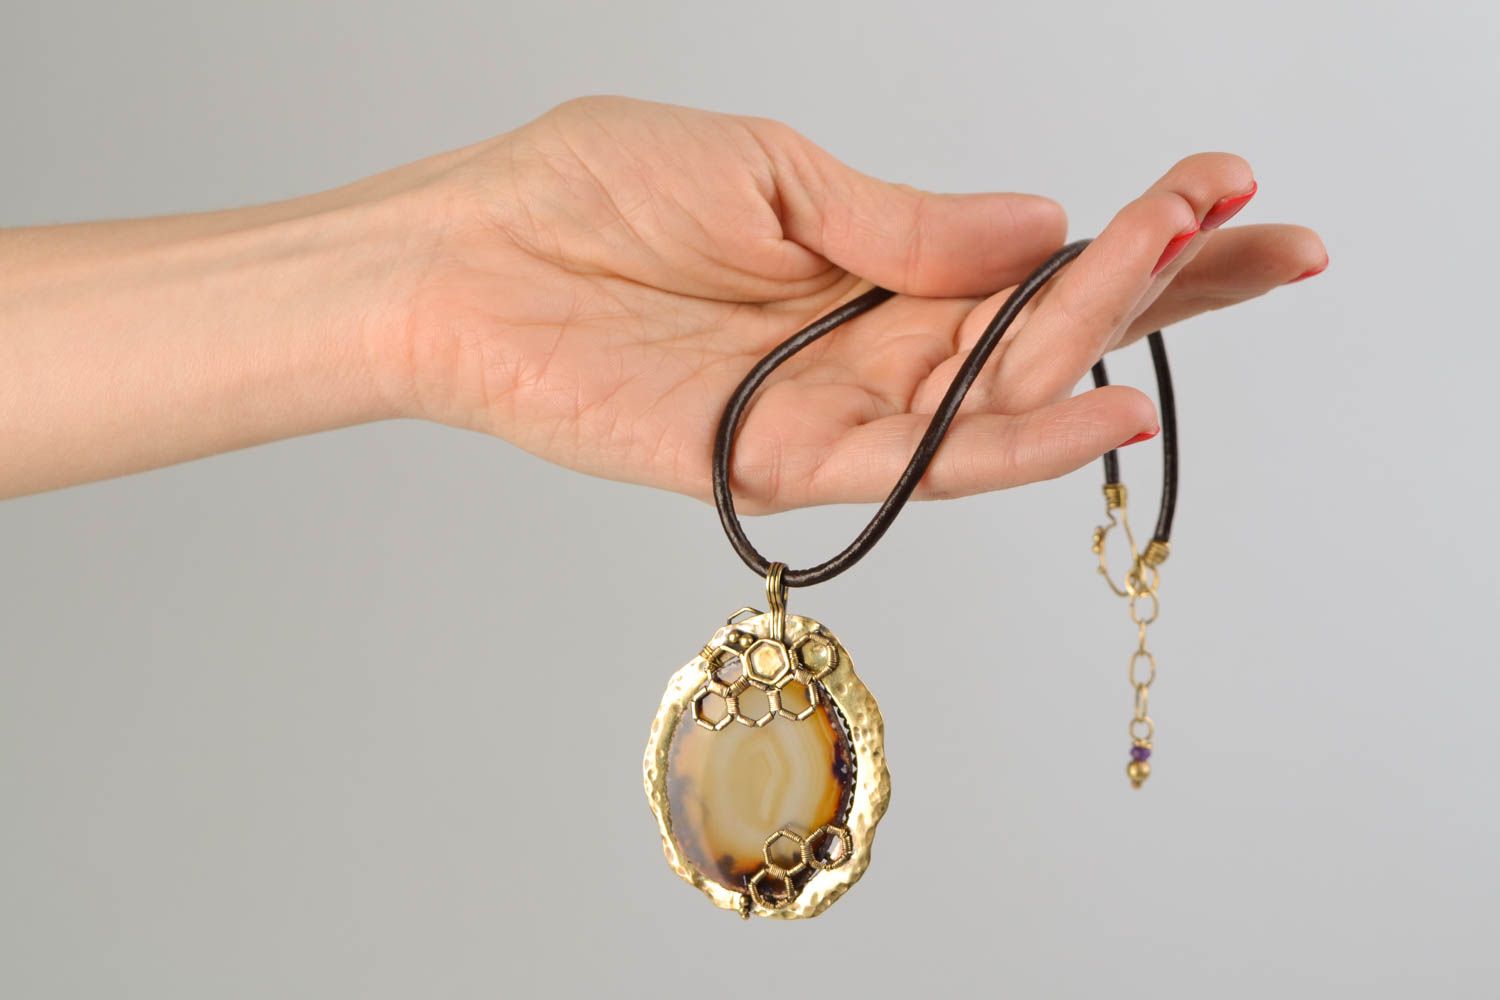 Latten pendant with natural stone and cord photo 2